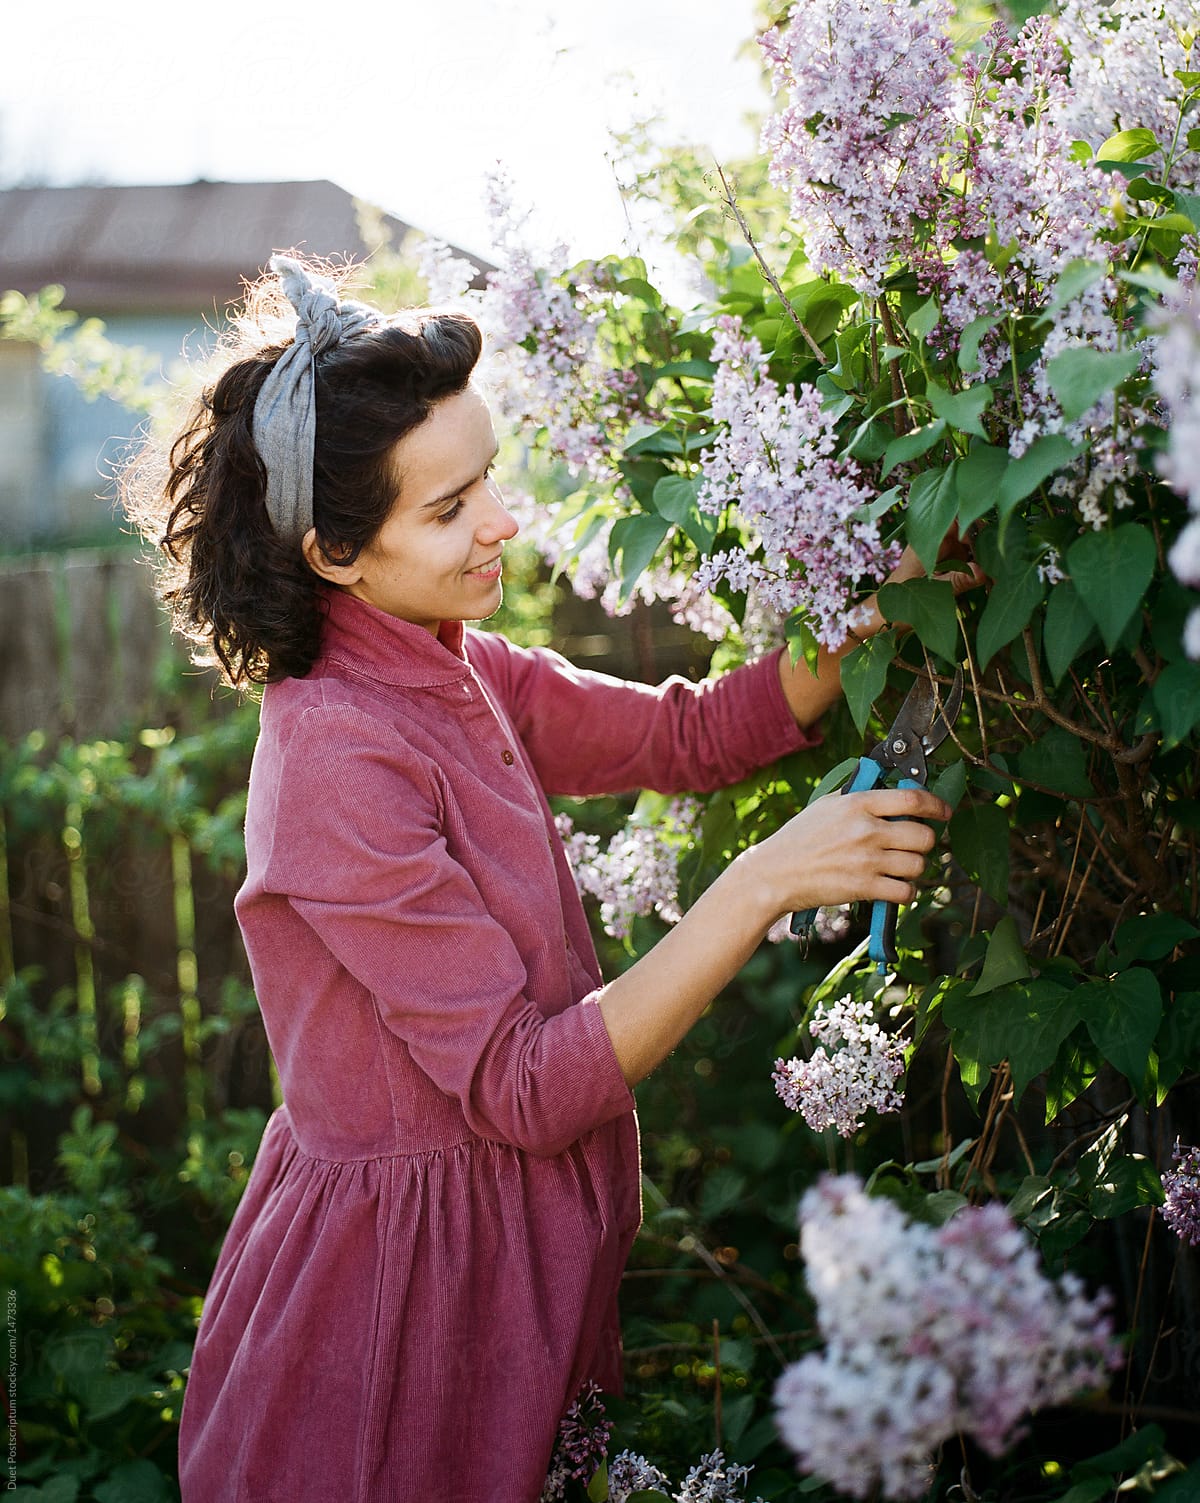 Woman cutting flowers for bunch